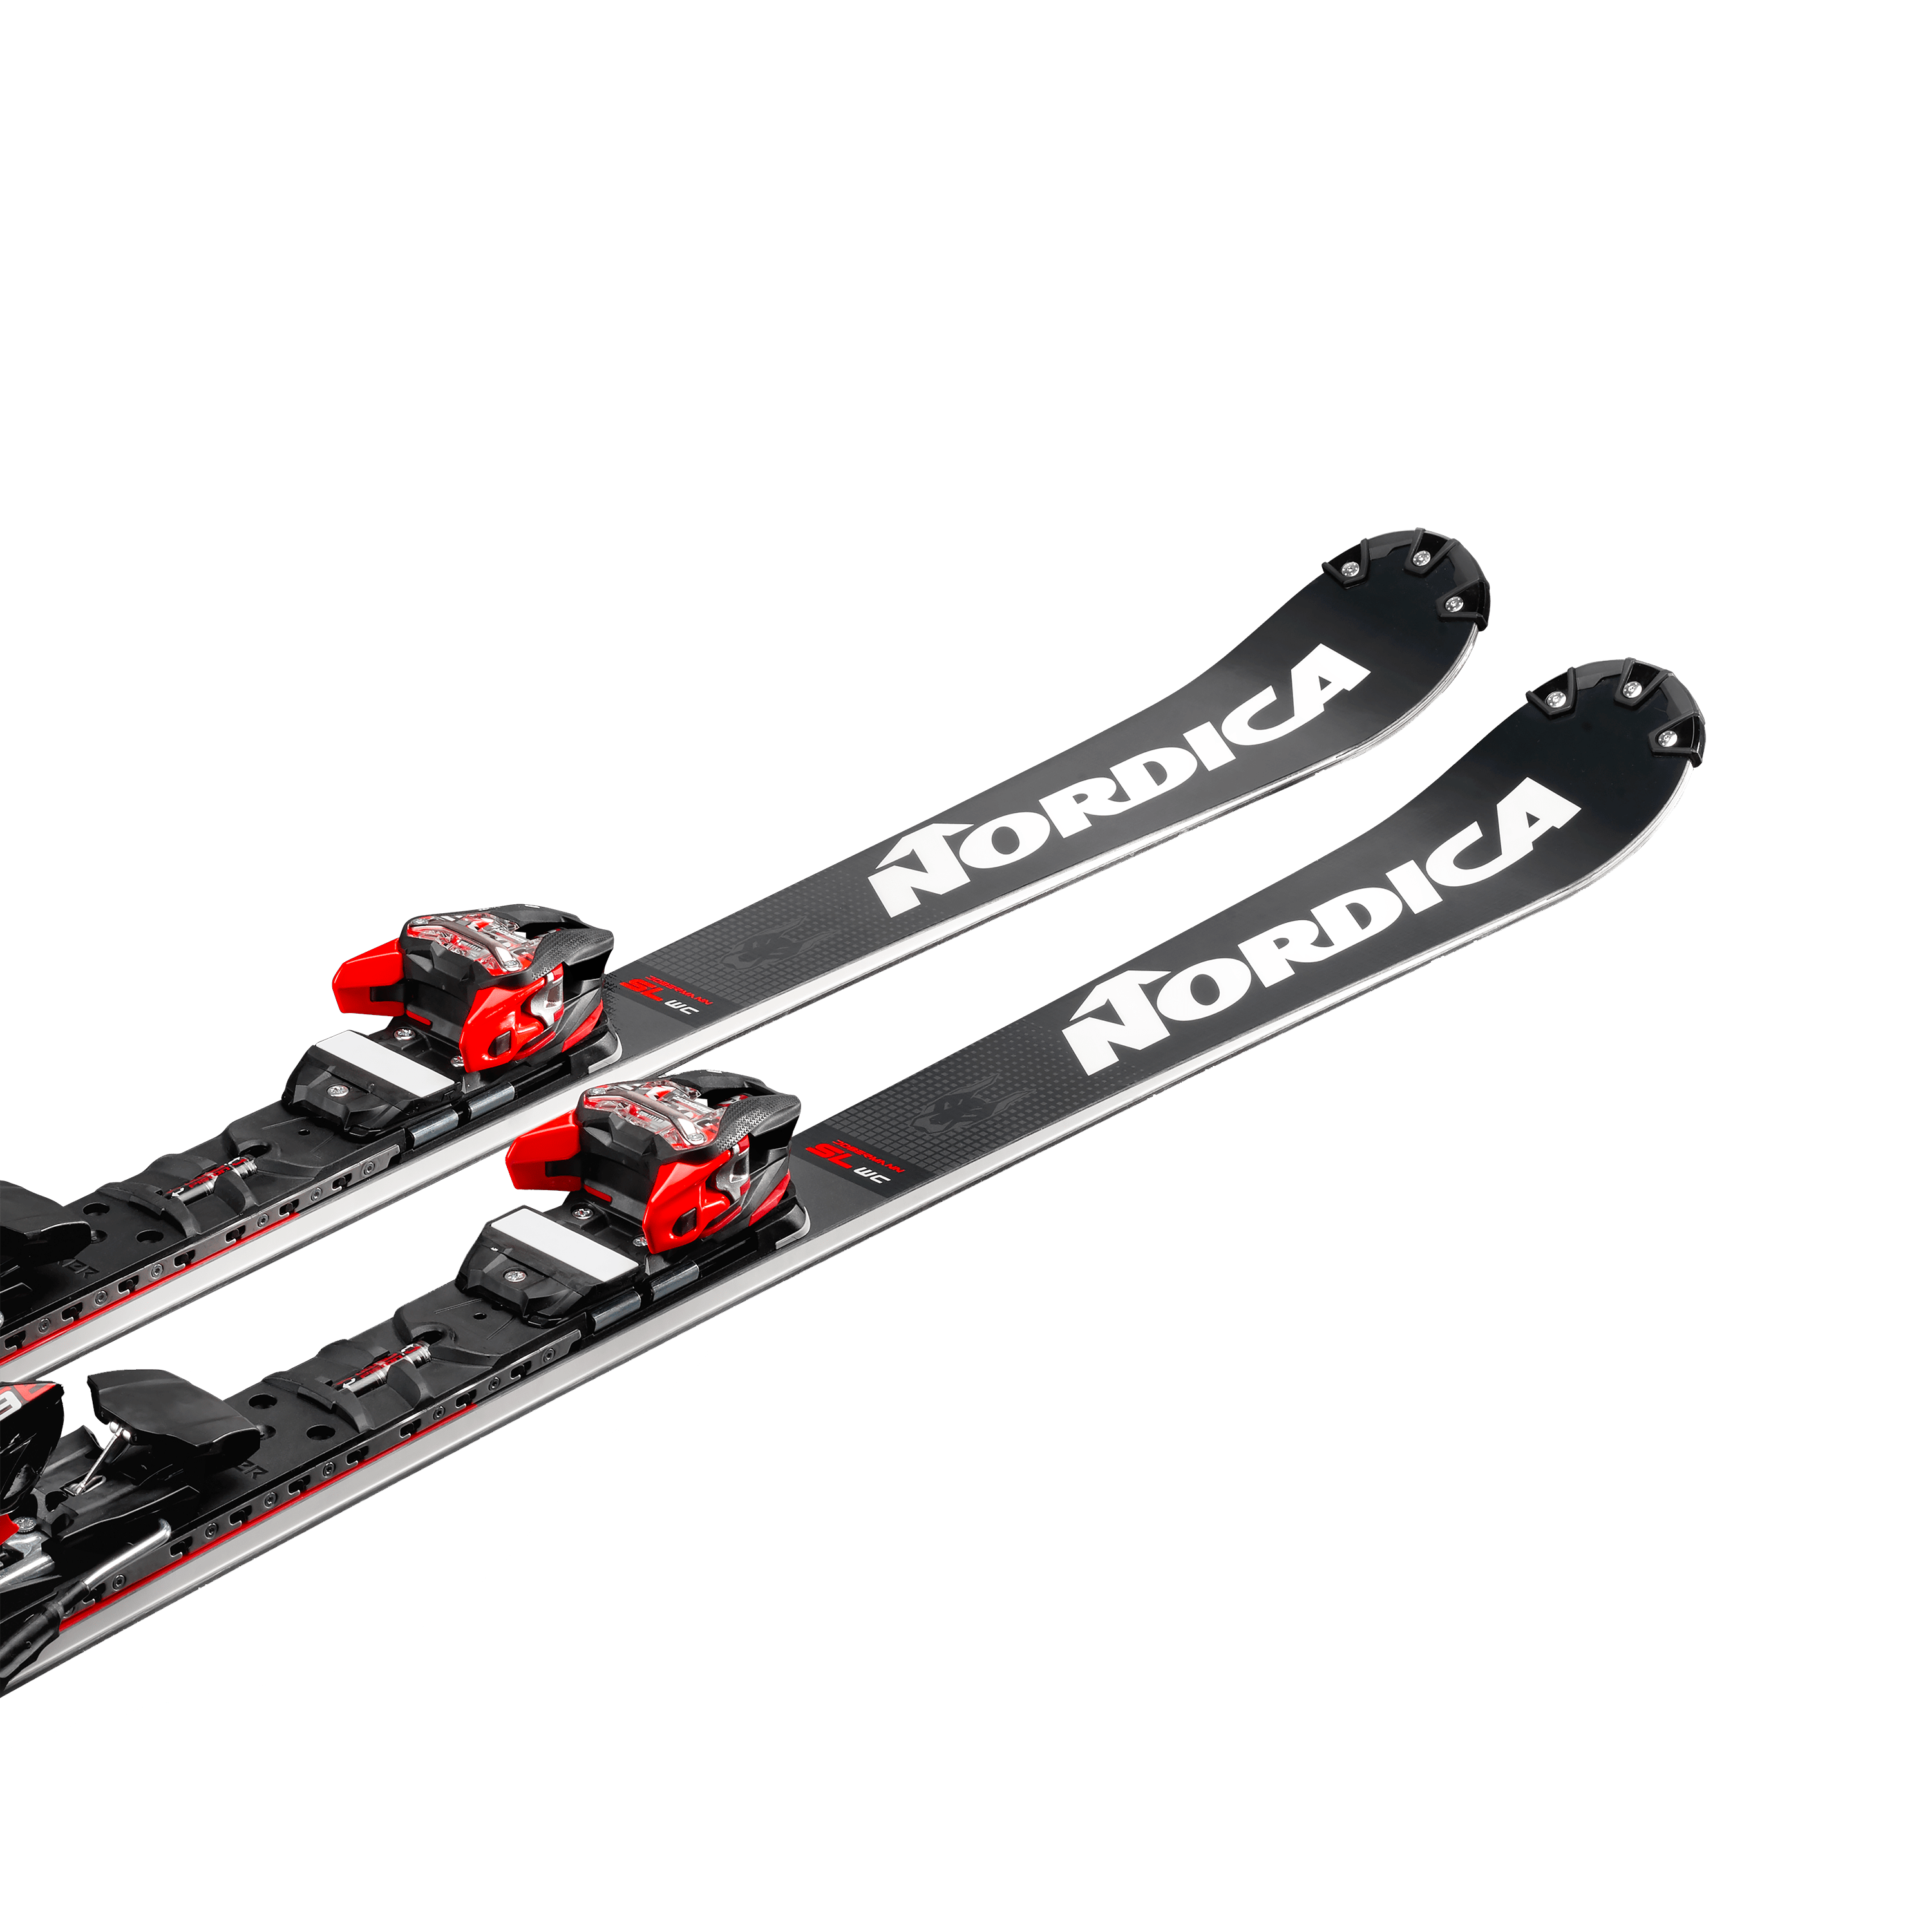 Picture of the Nordica Dobermann sl wc plate skis.